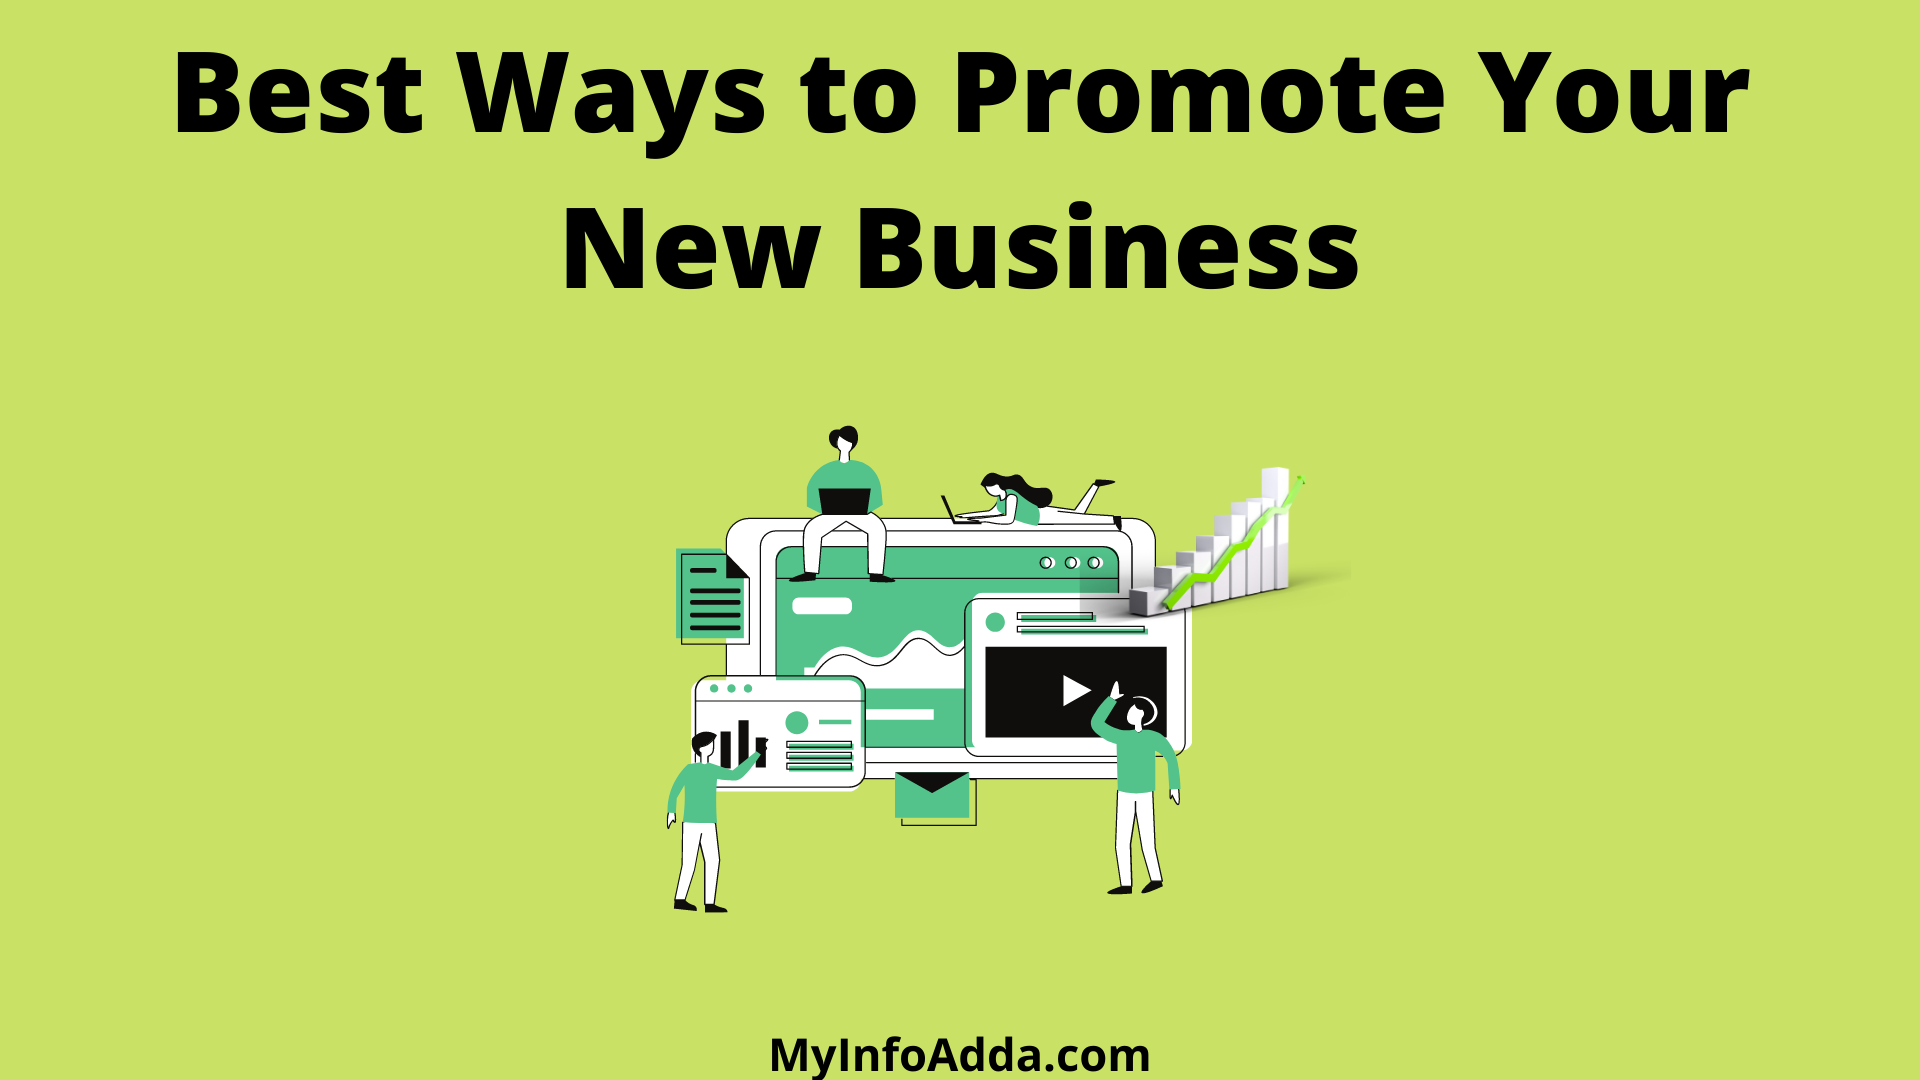 Best Ways to Promote Your New Business